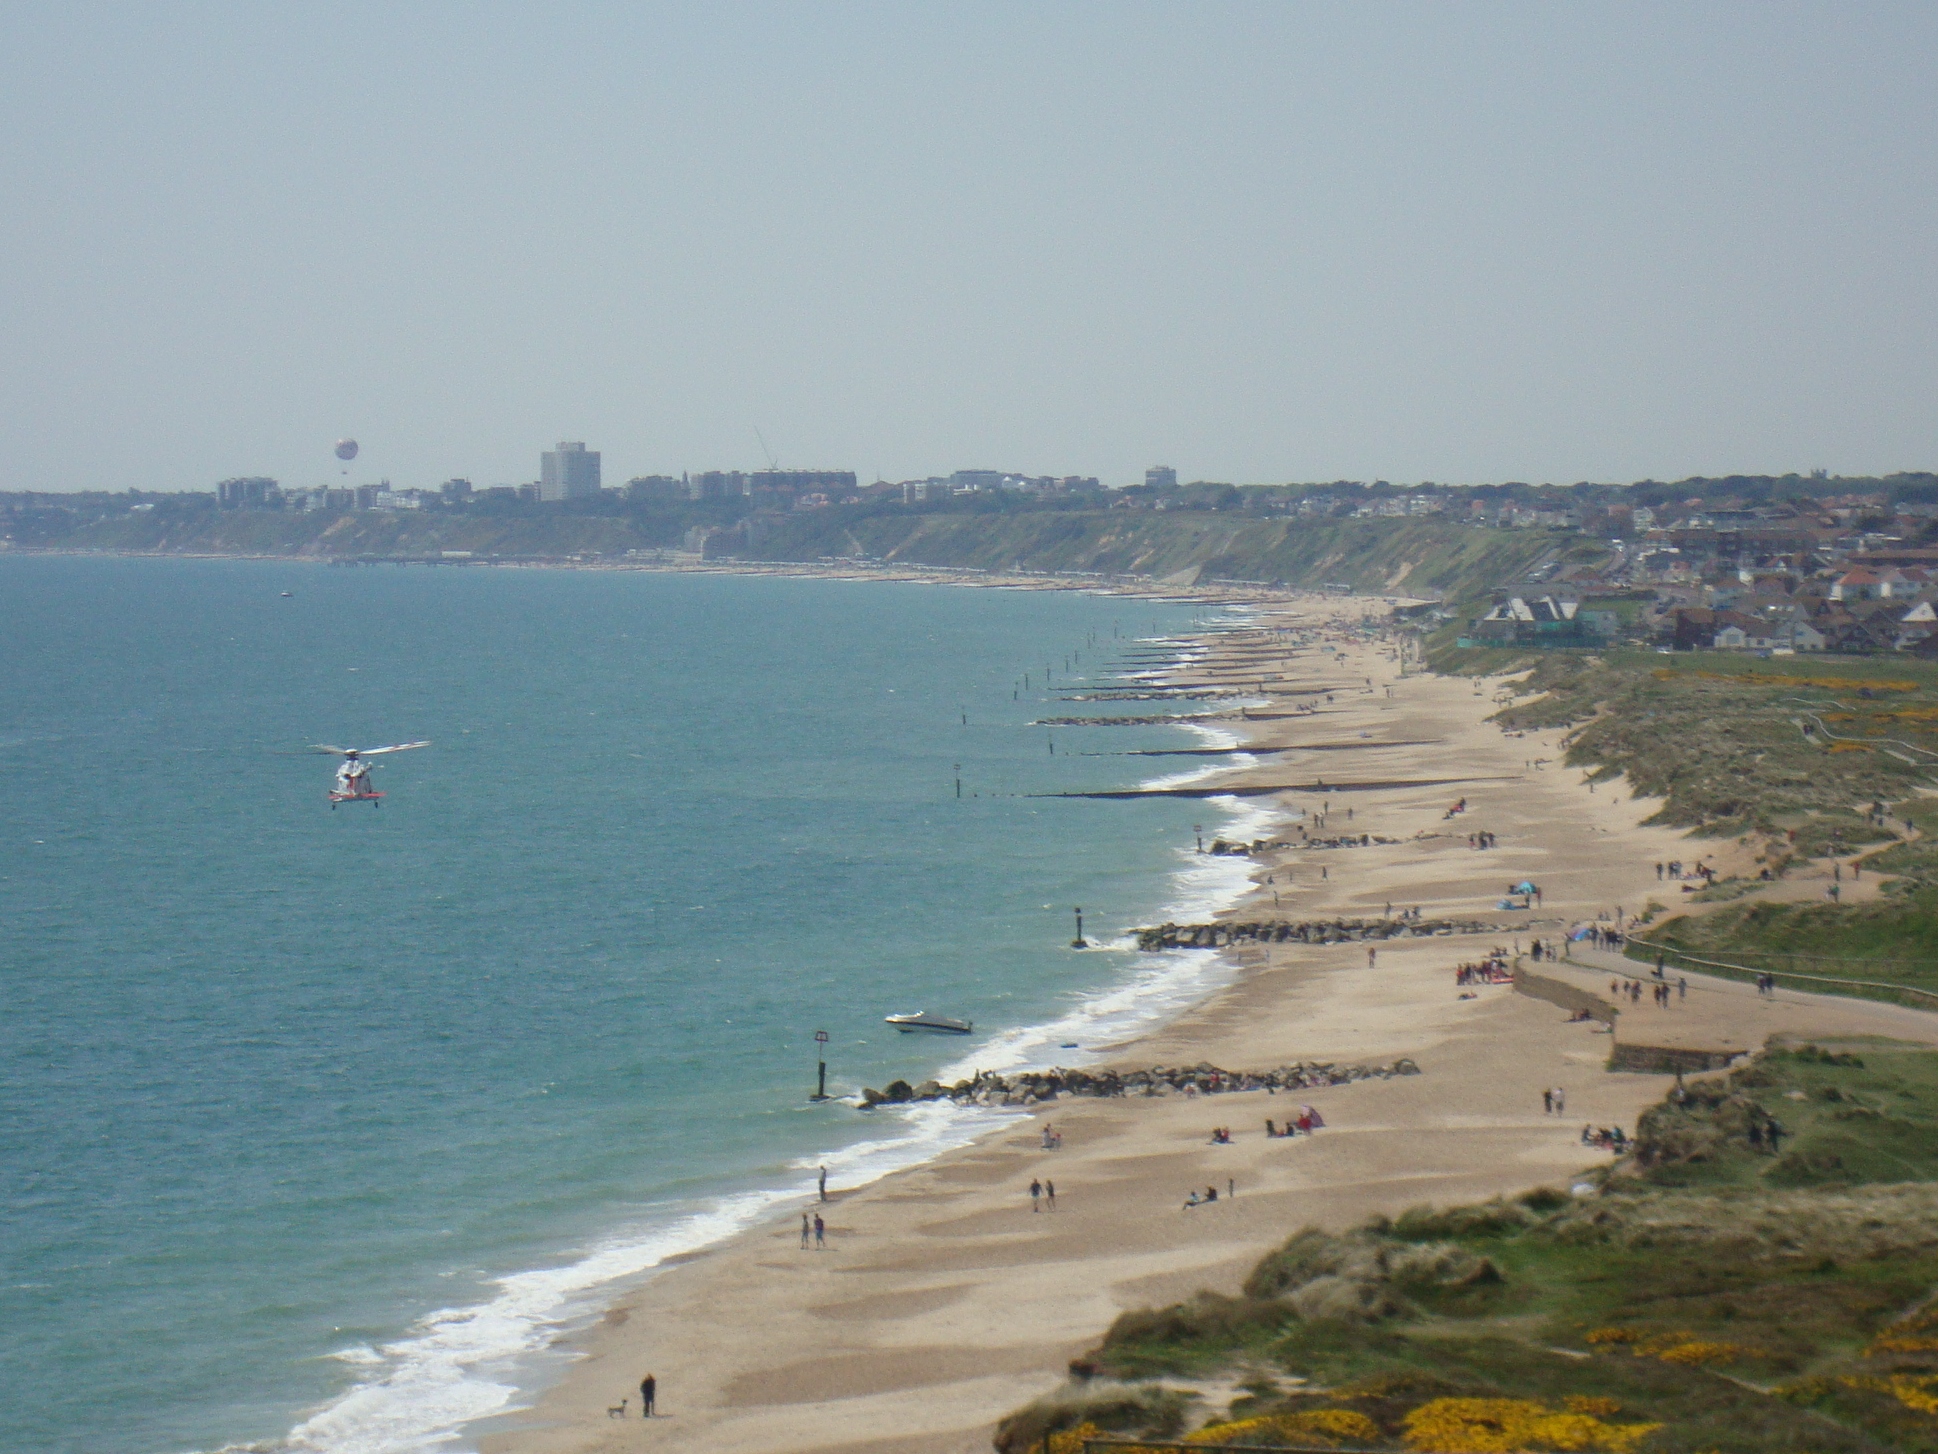 View towards Bournemouth